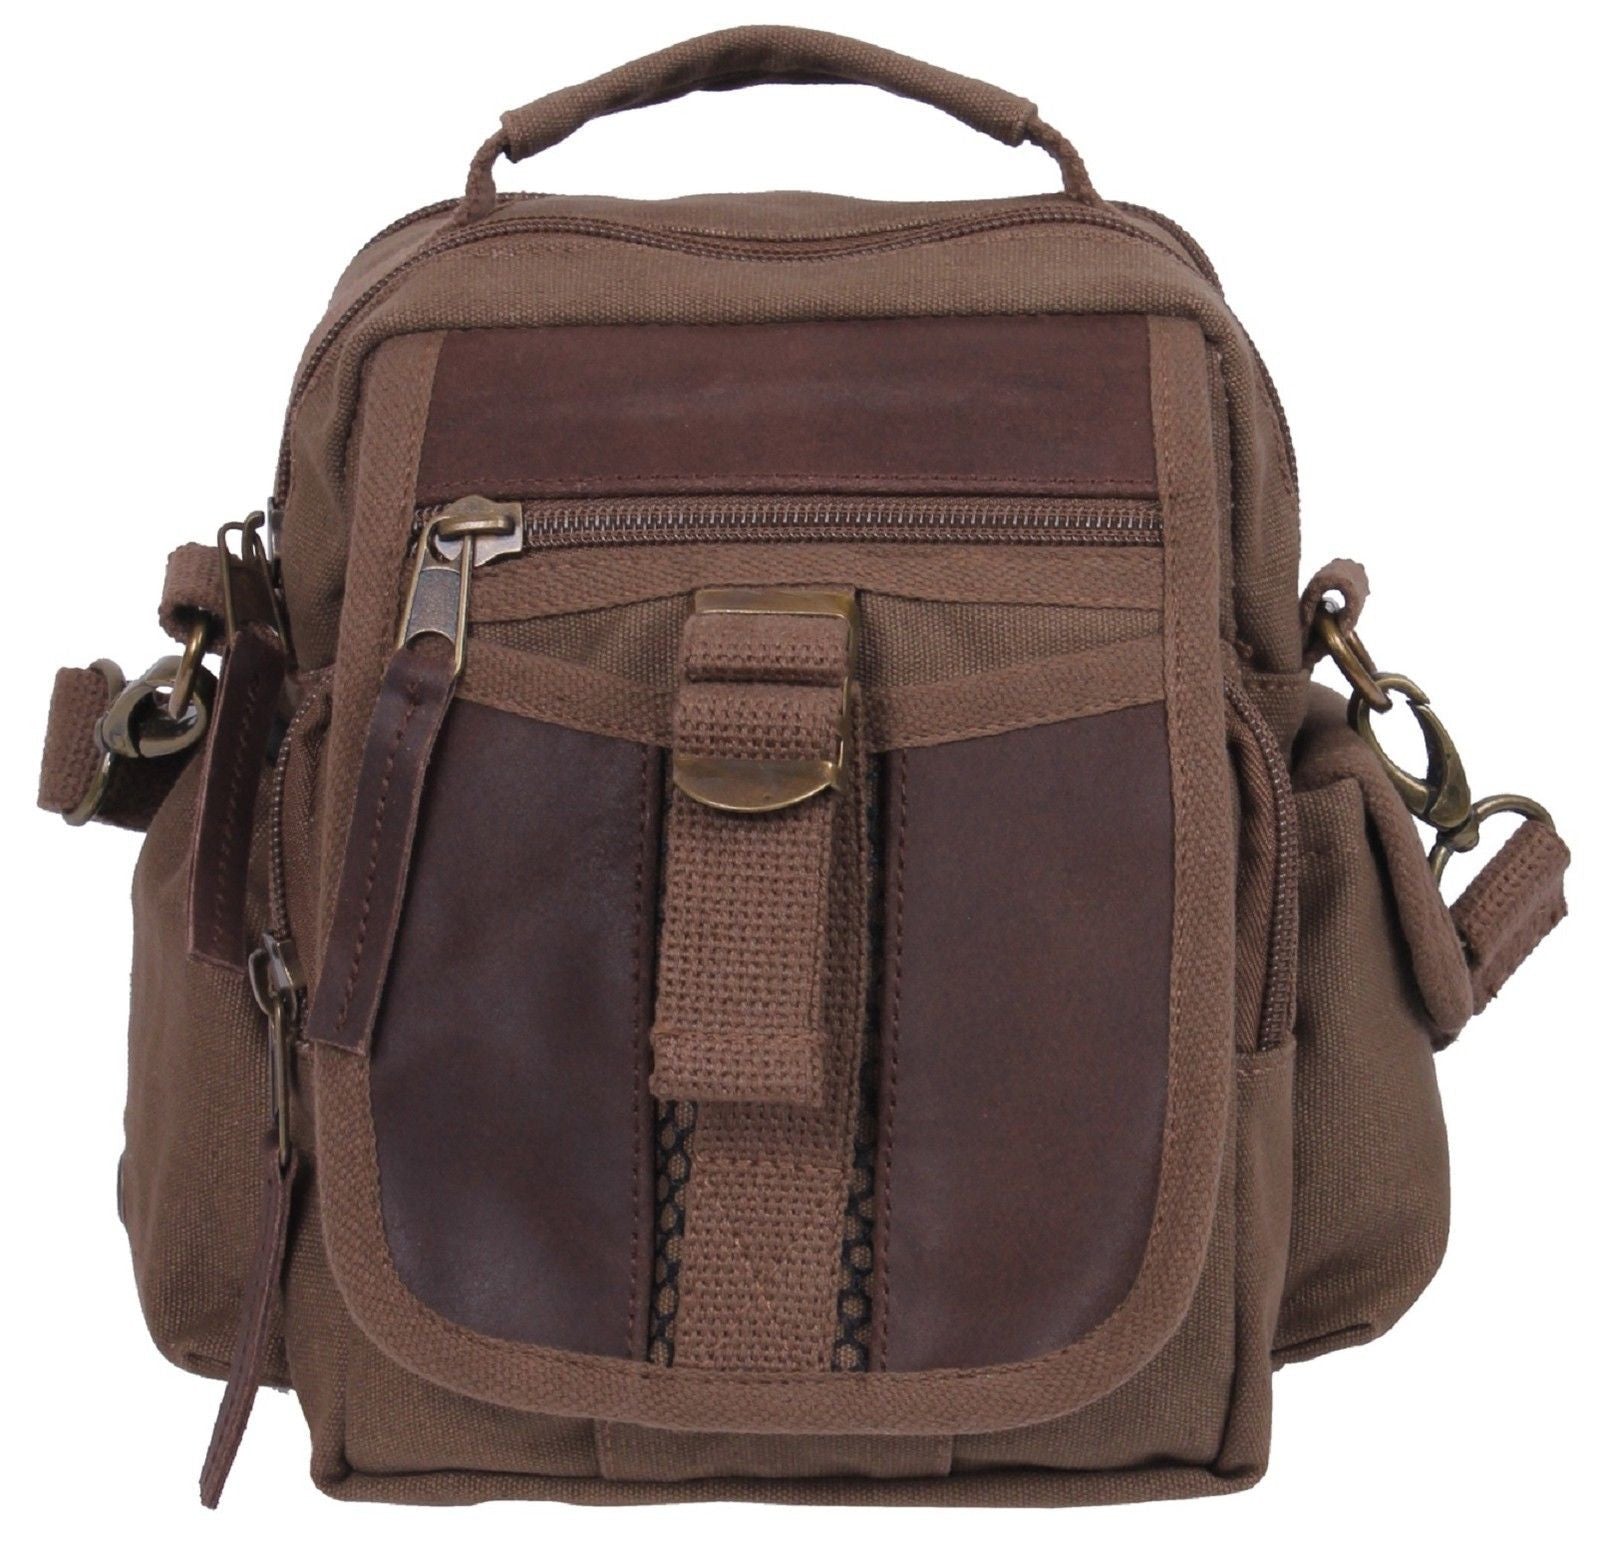 Brown Leather and Canvas Compact Travel Bag - Rothco 8&quot; Tourist Should – Grunt Force